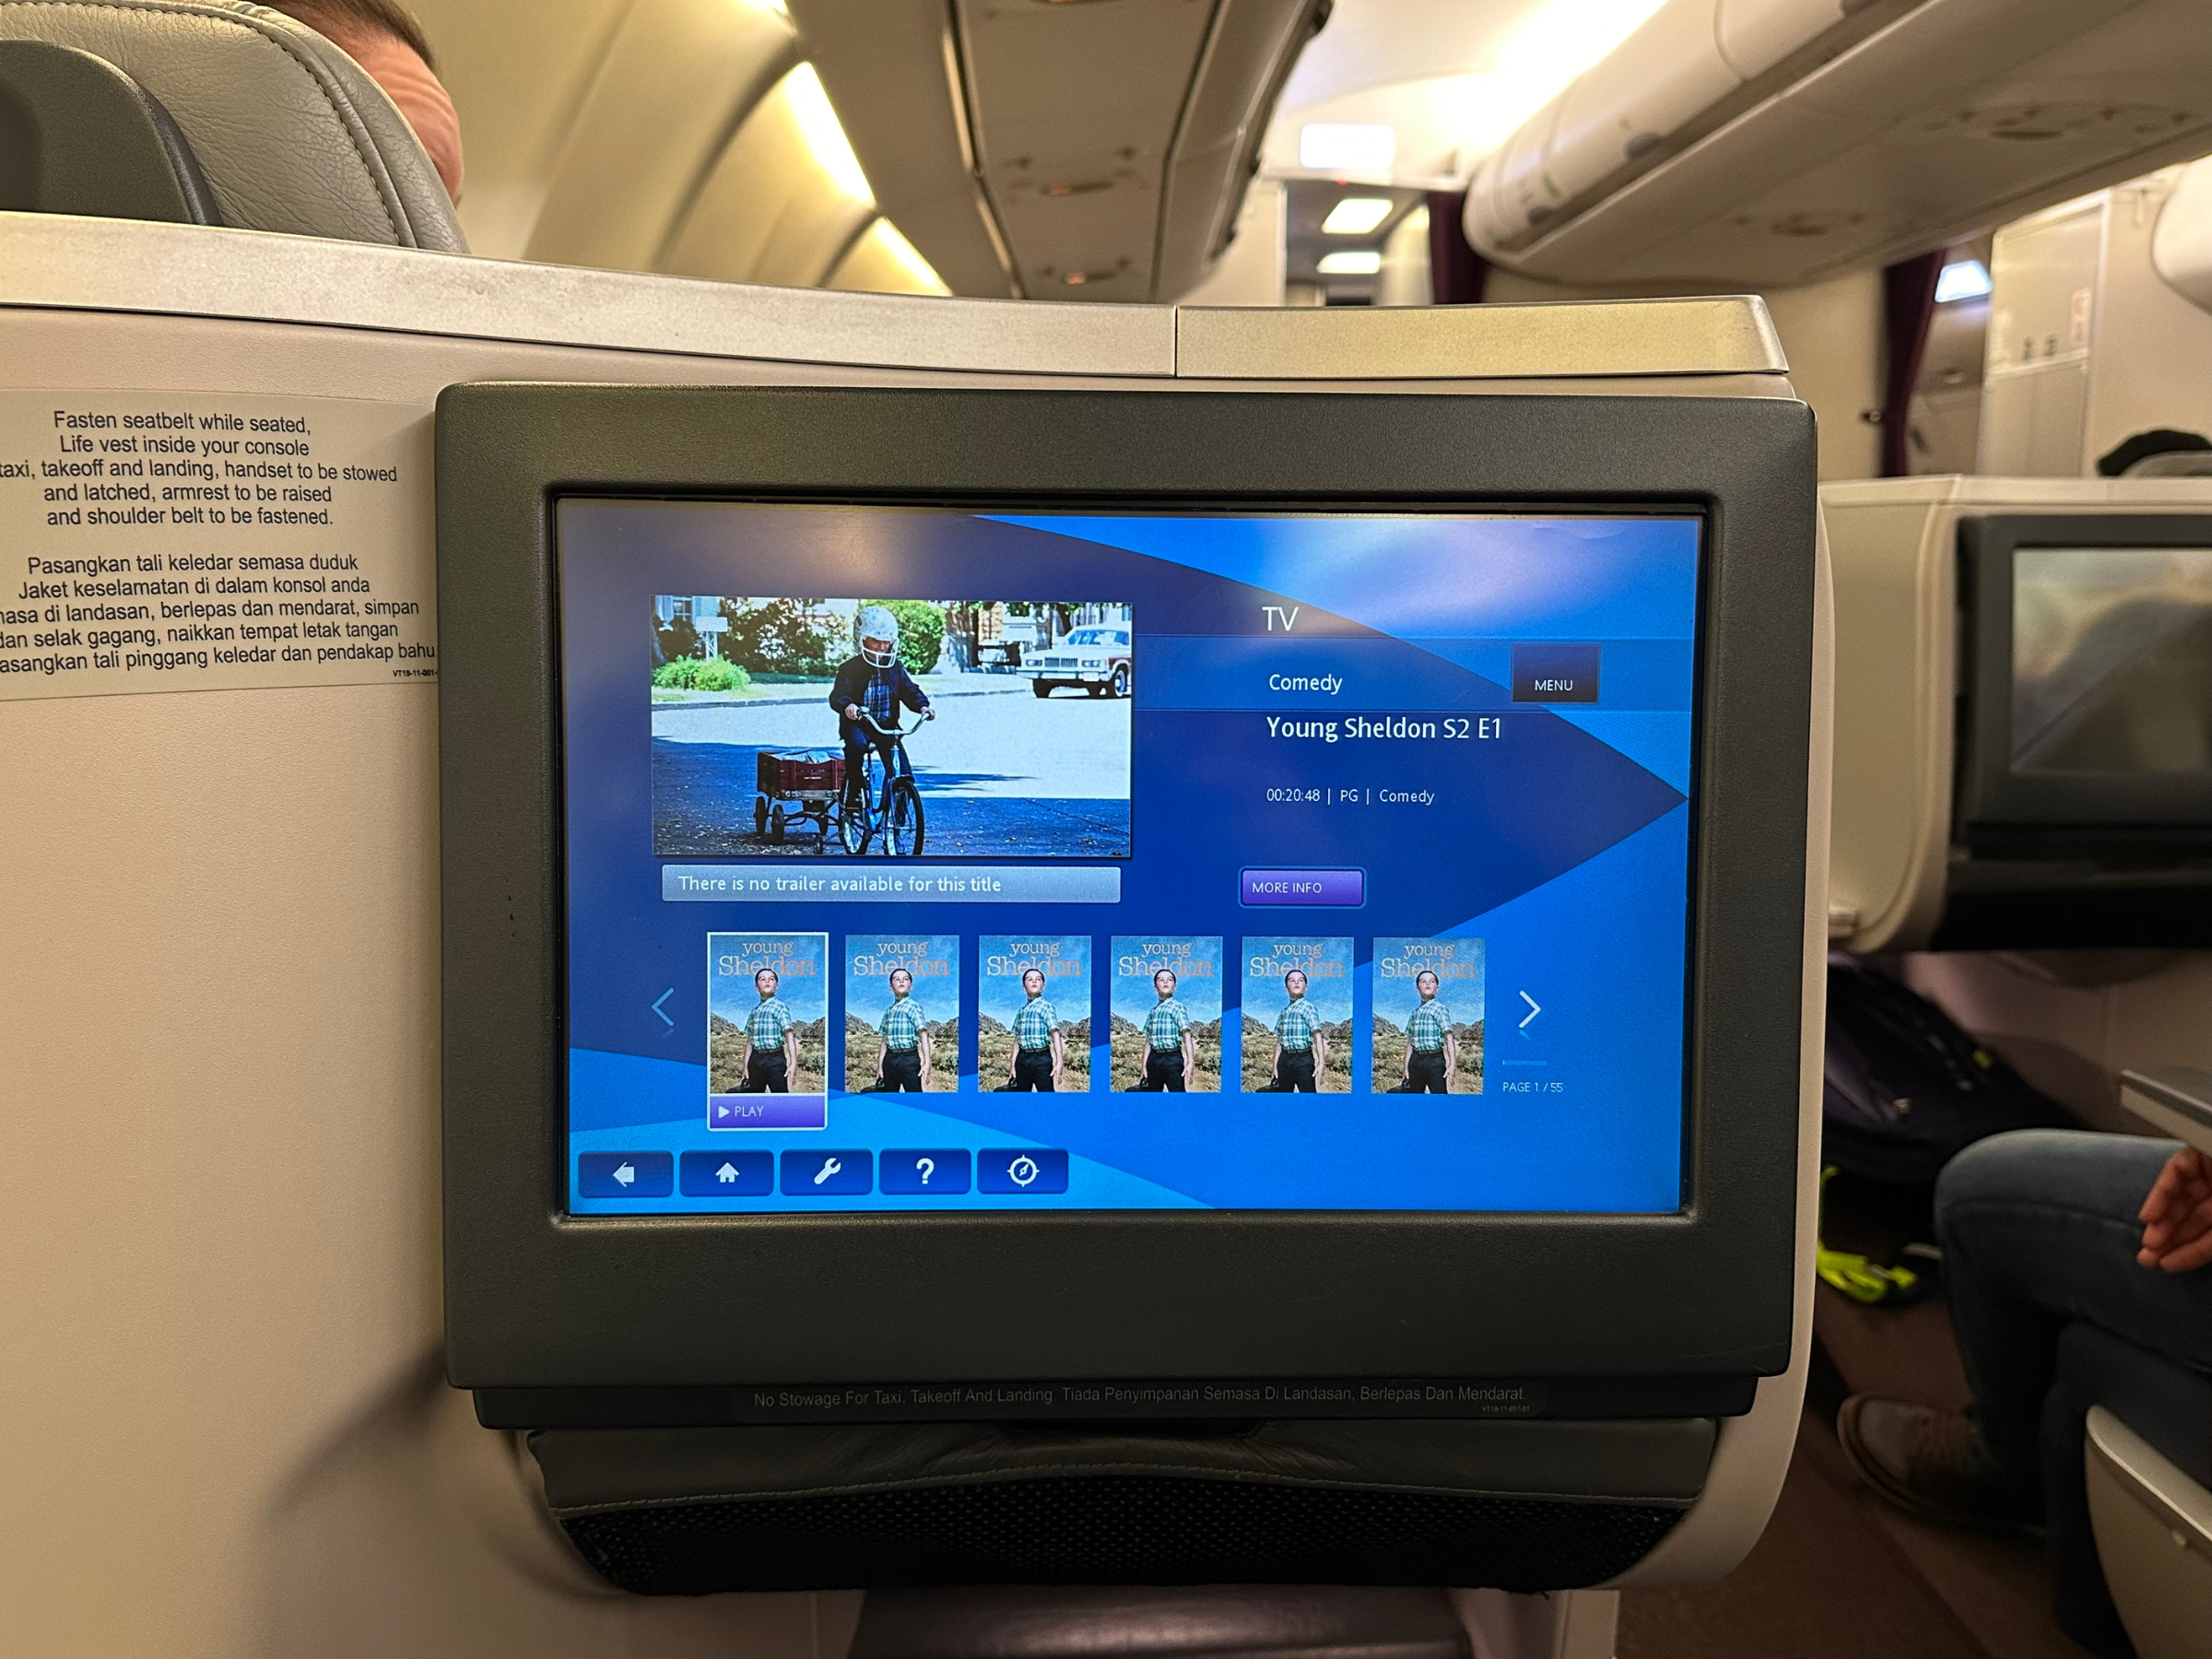 Malaysia Airlines Business Class seatback screen